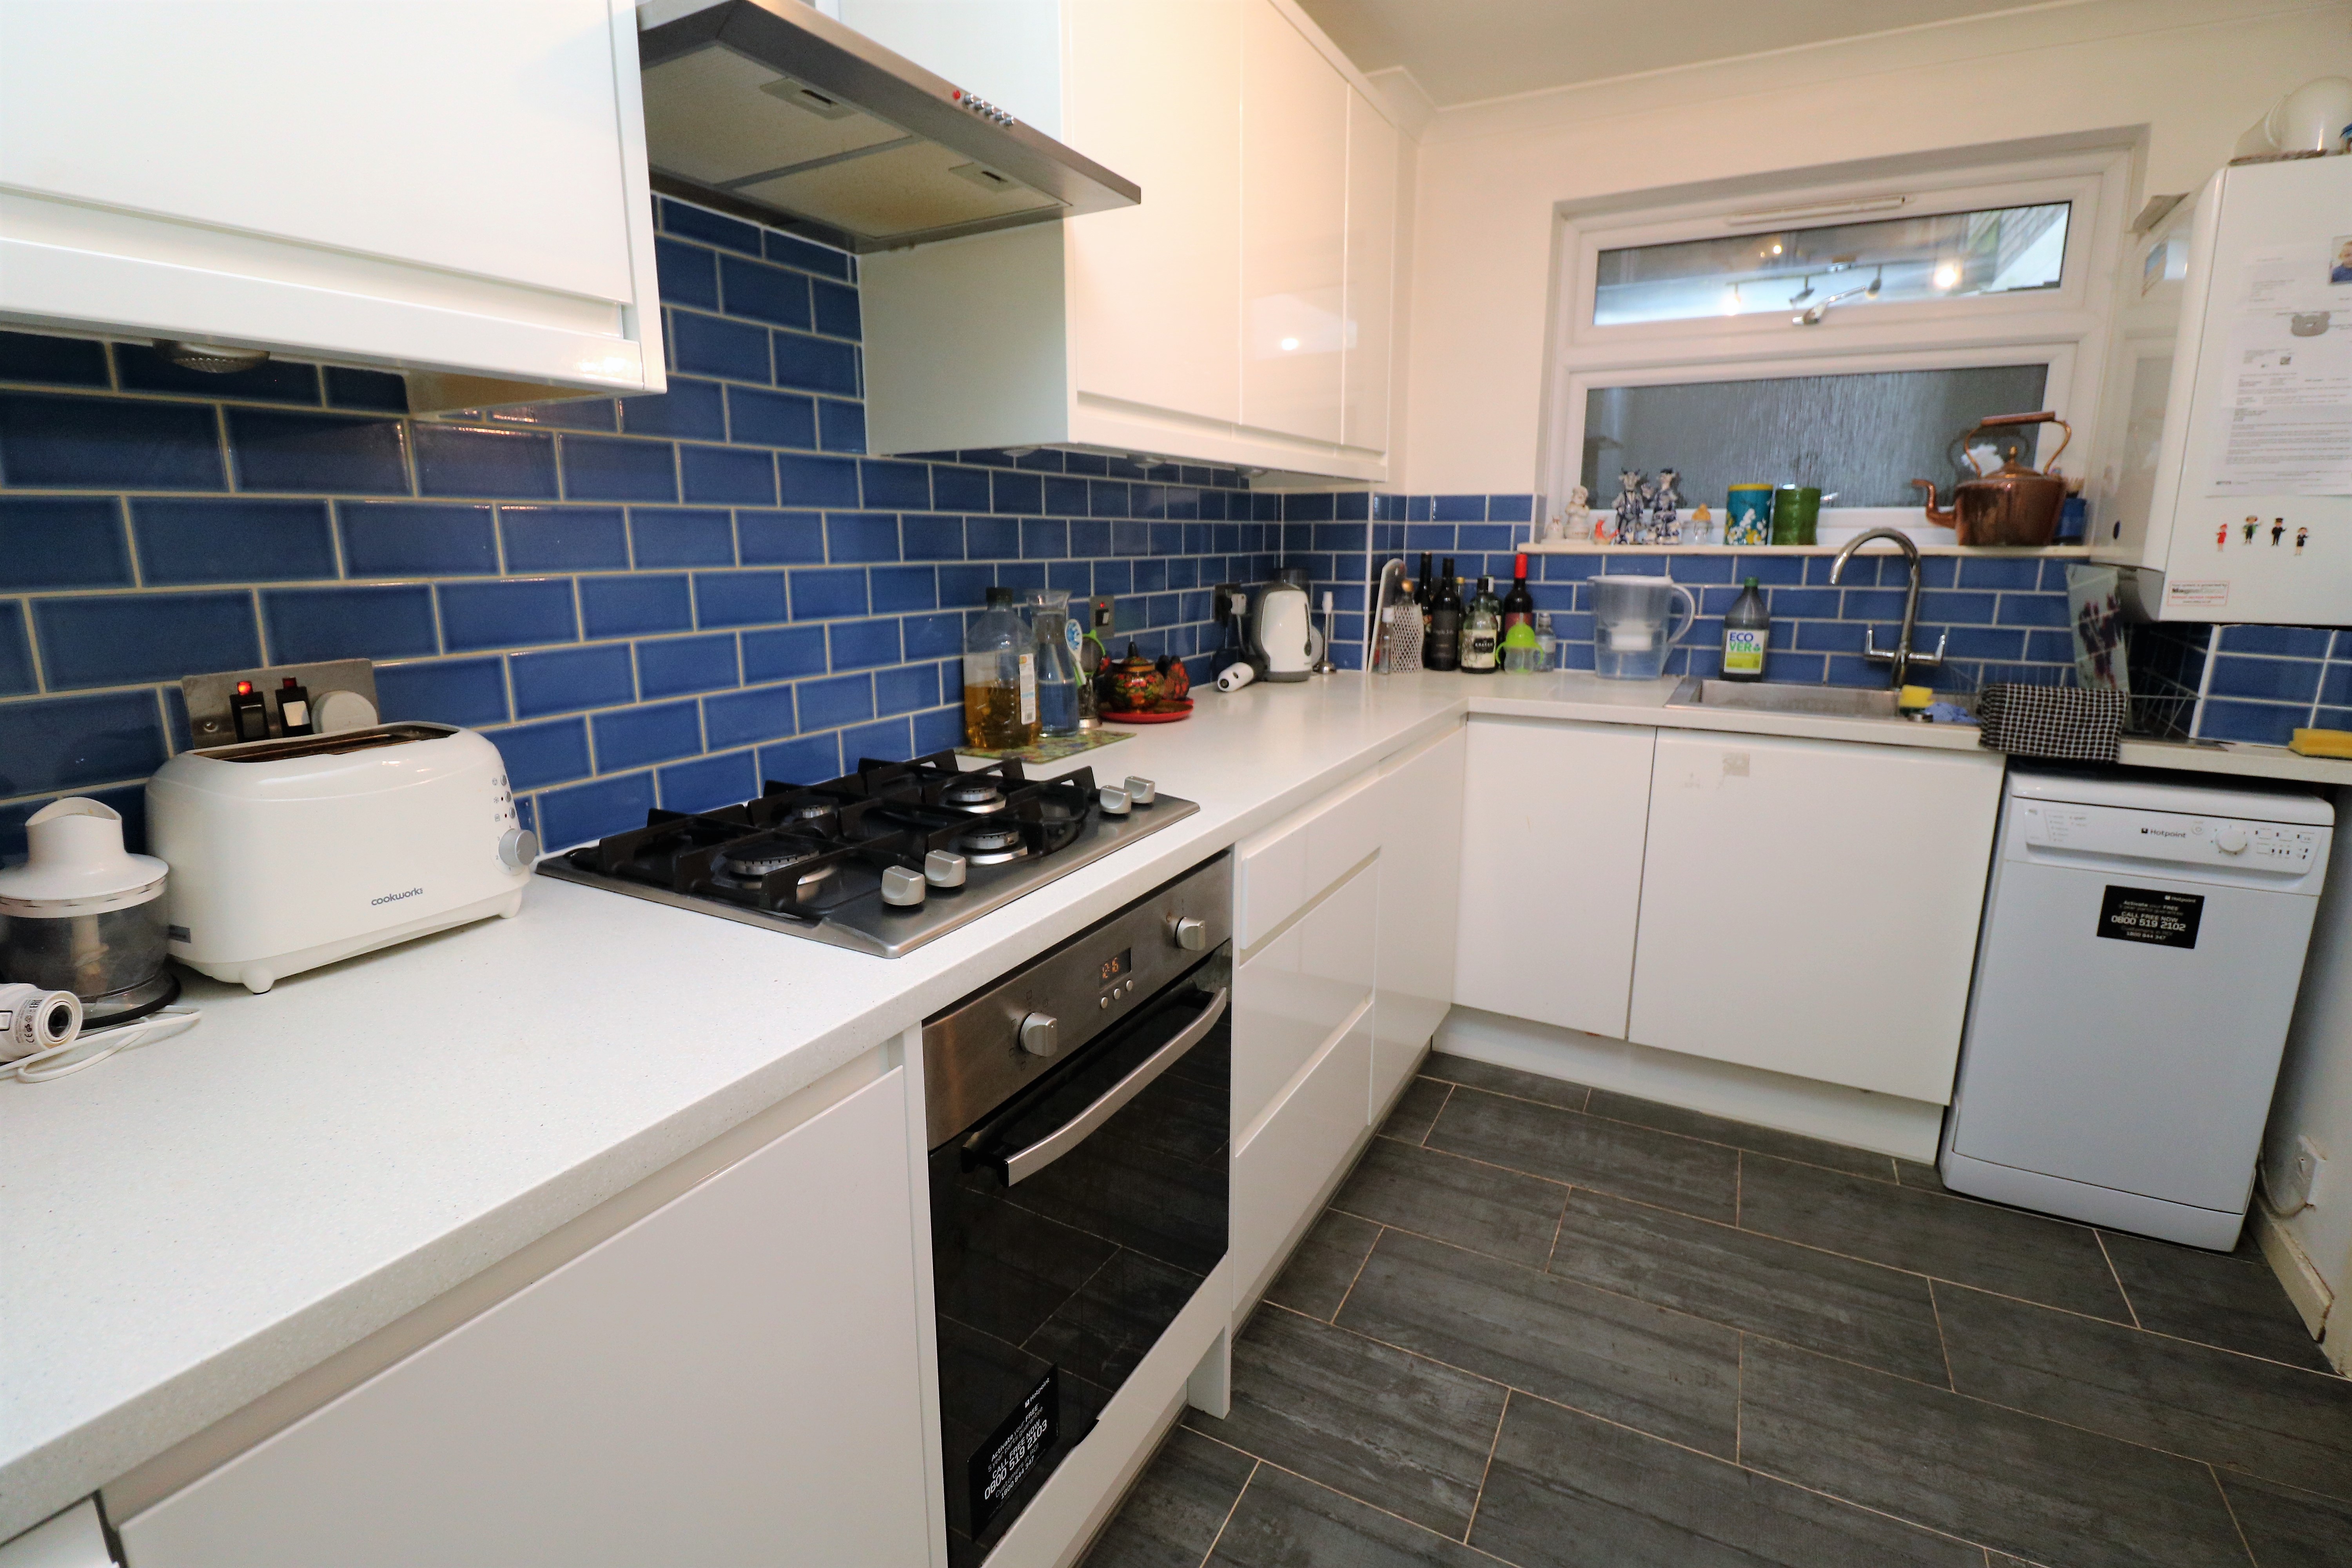 Private ground floor two double bedroom flat in N6. Crouch End borders of Highgate.